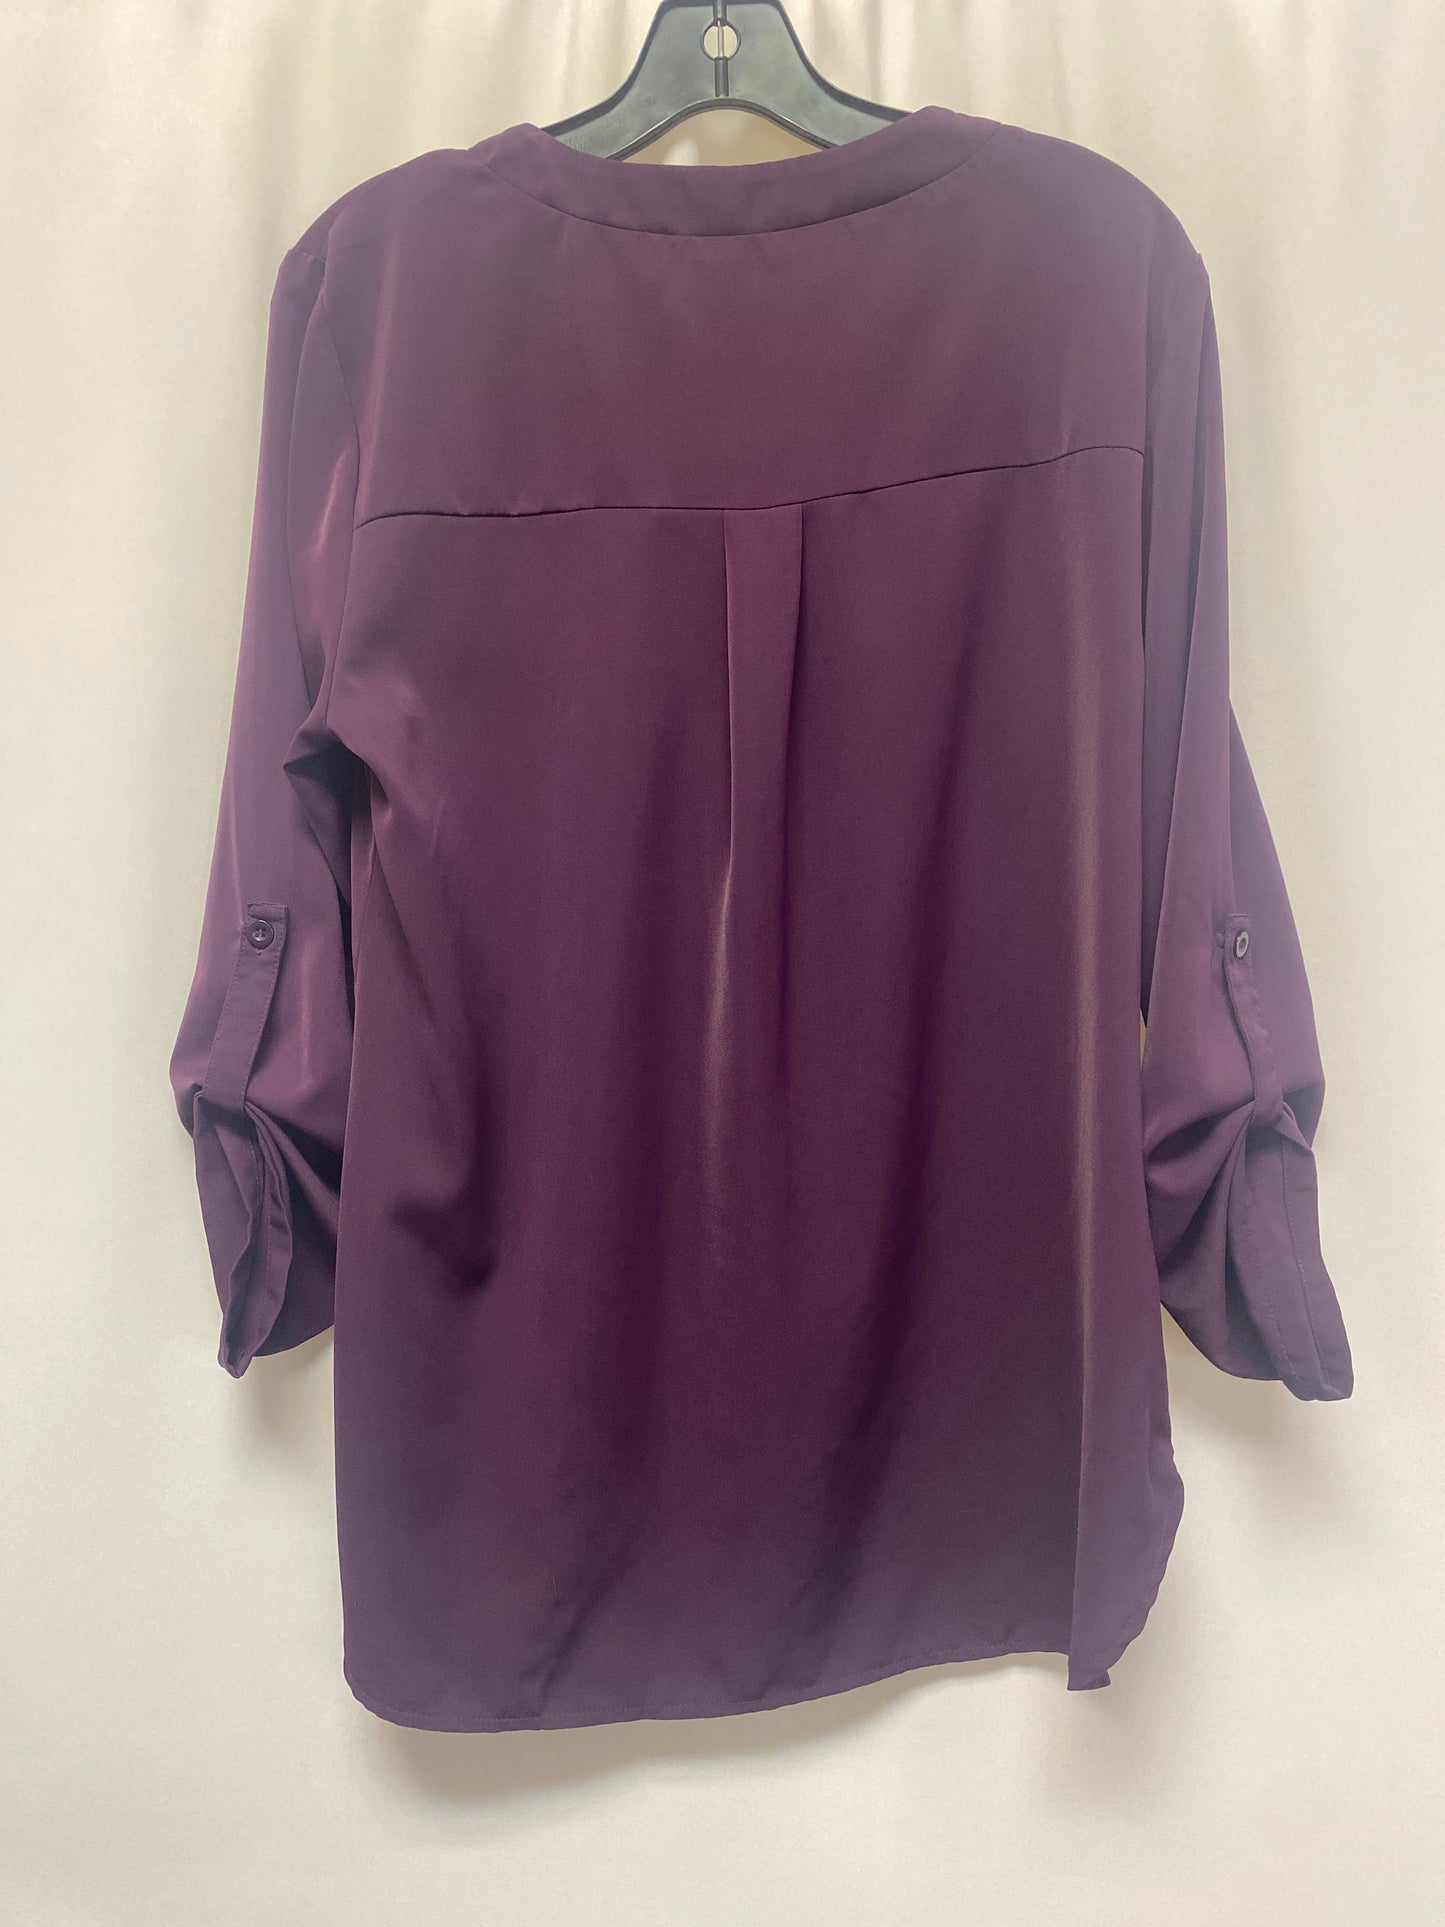 Purple Top Long Sleeve Clothes Mentor, Size L